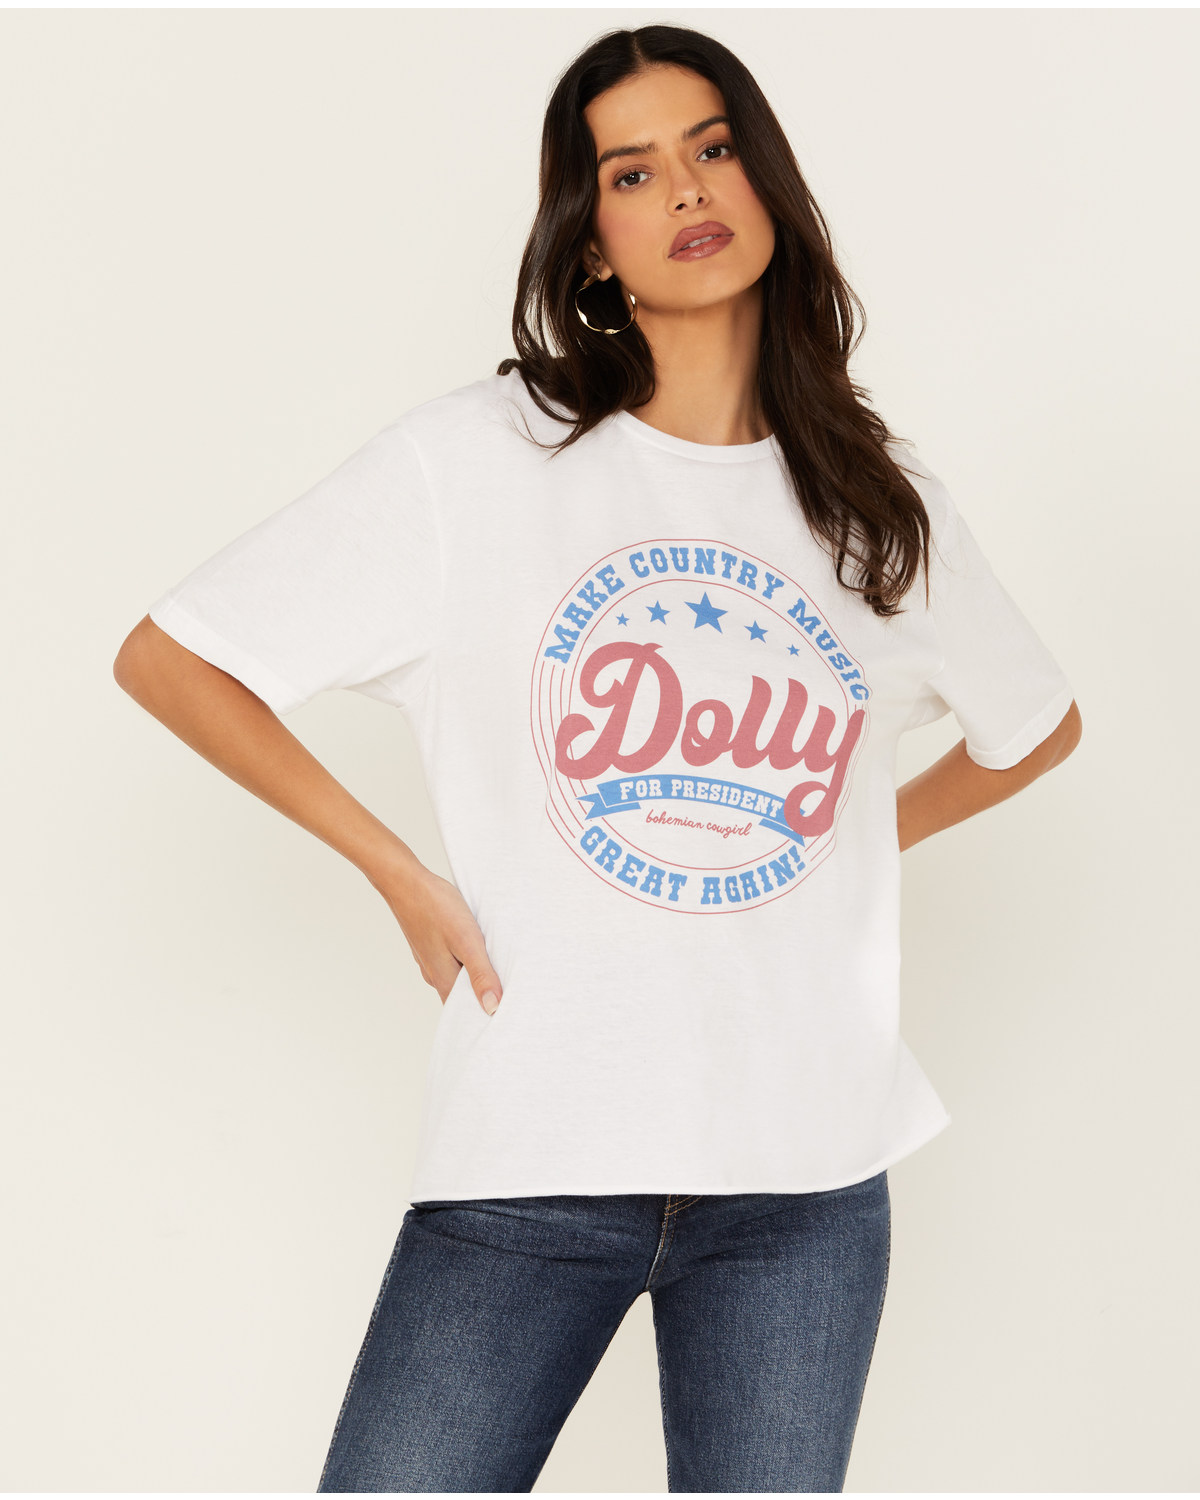 Bohemian Cowgirl Women's Dolly 4 Pres Short Sleeve Graphic Tee